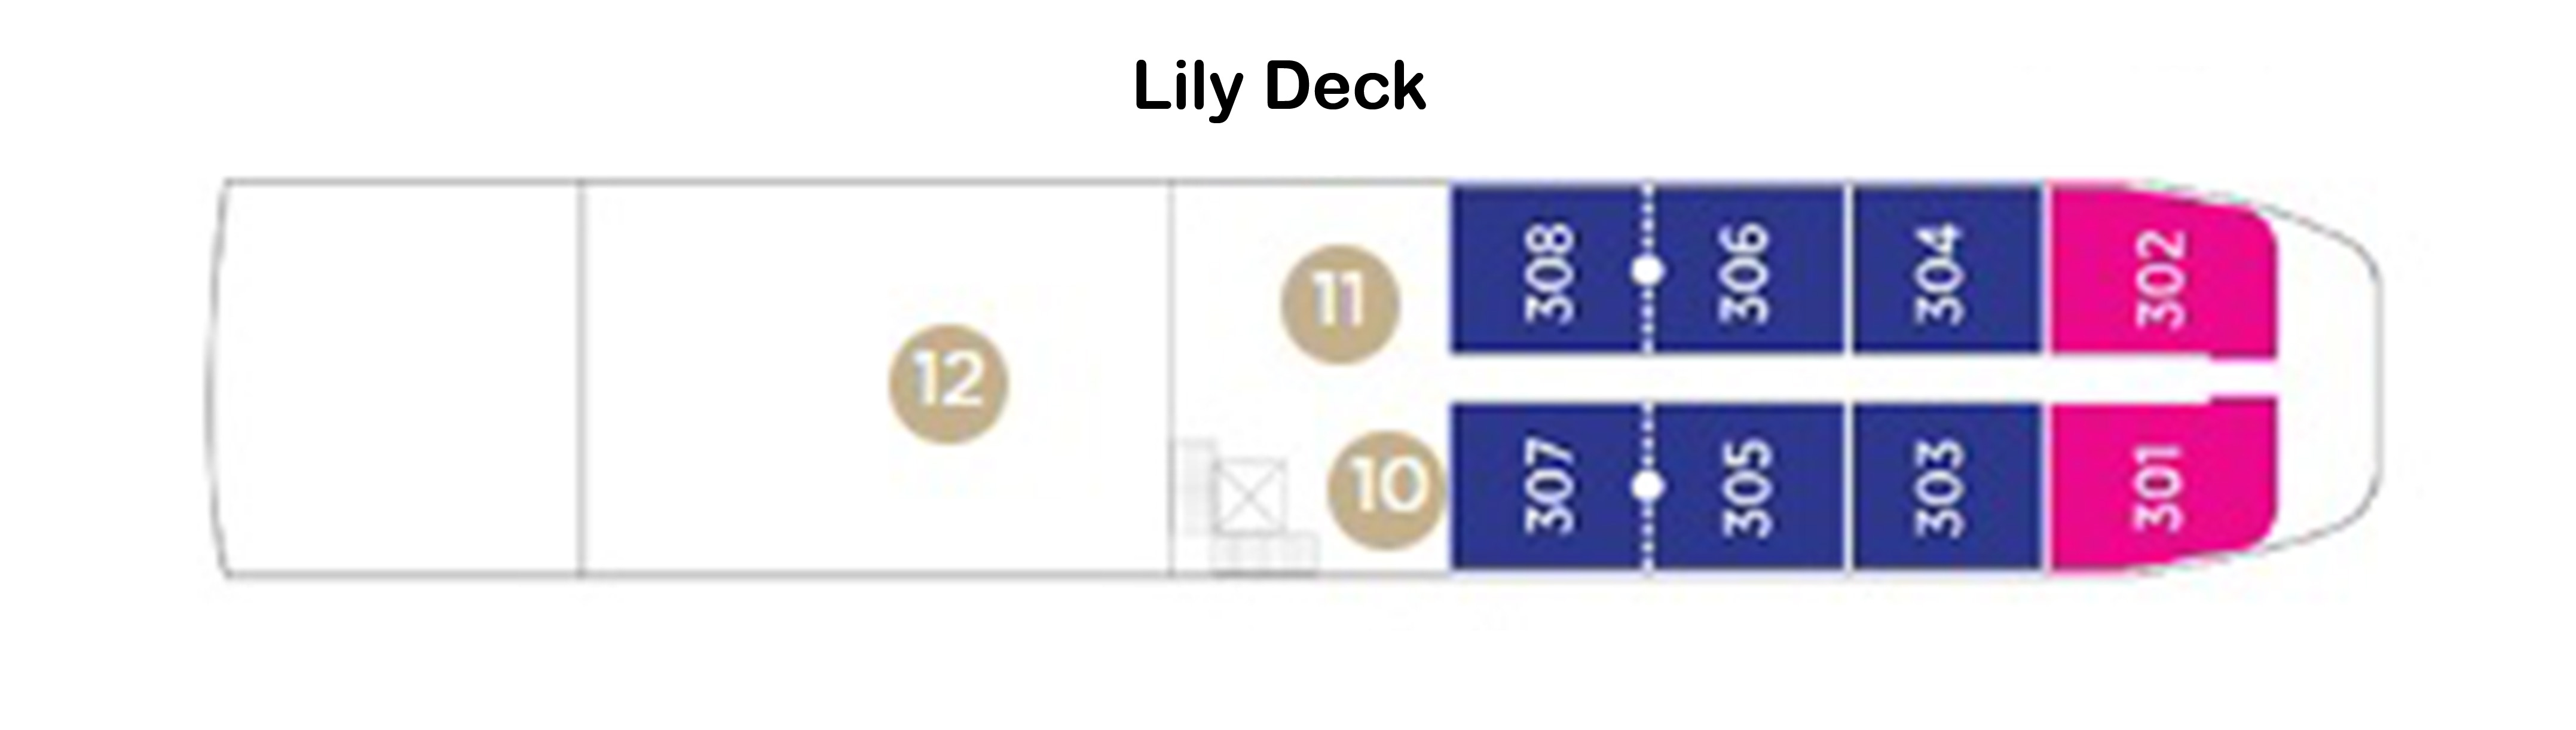 Lily Deck